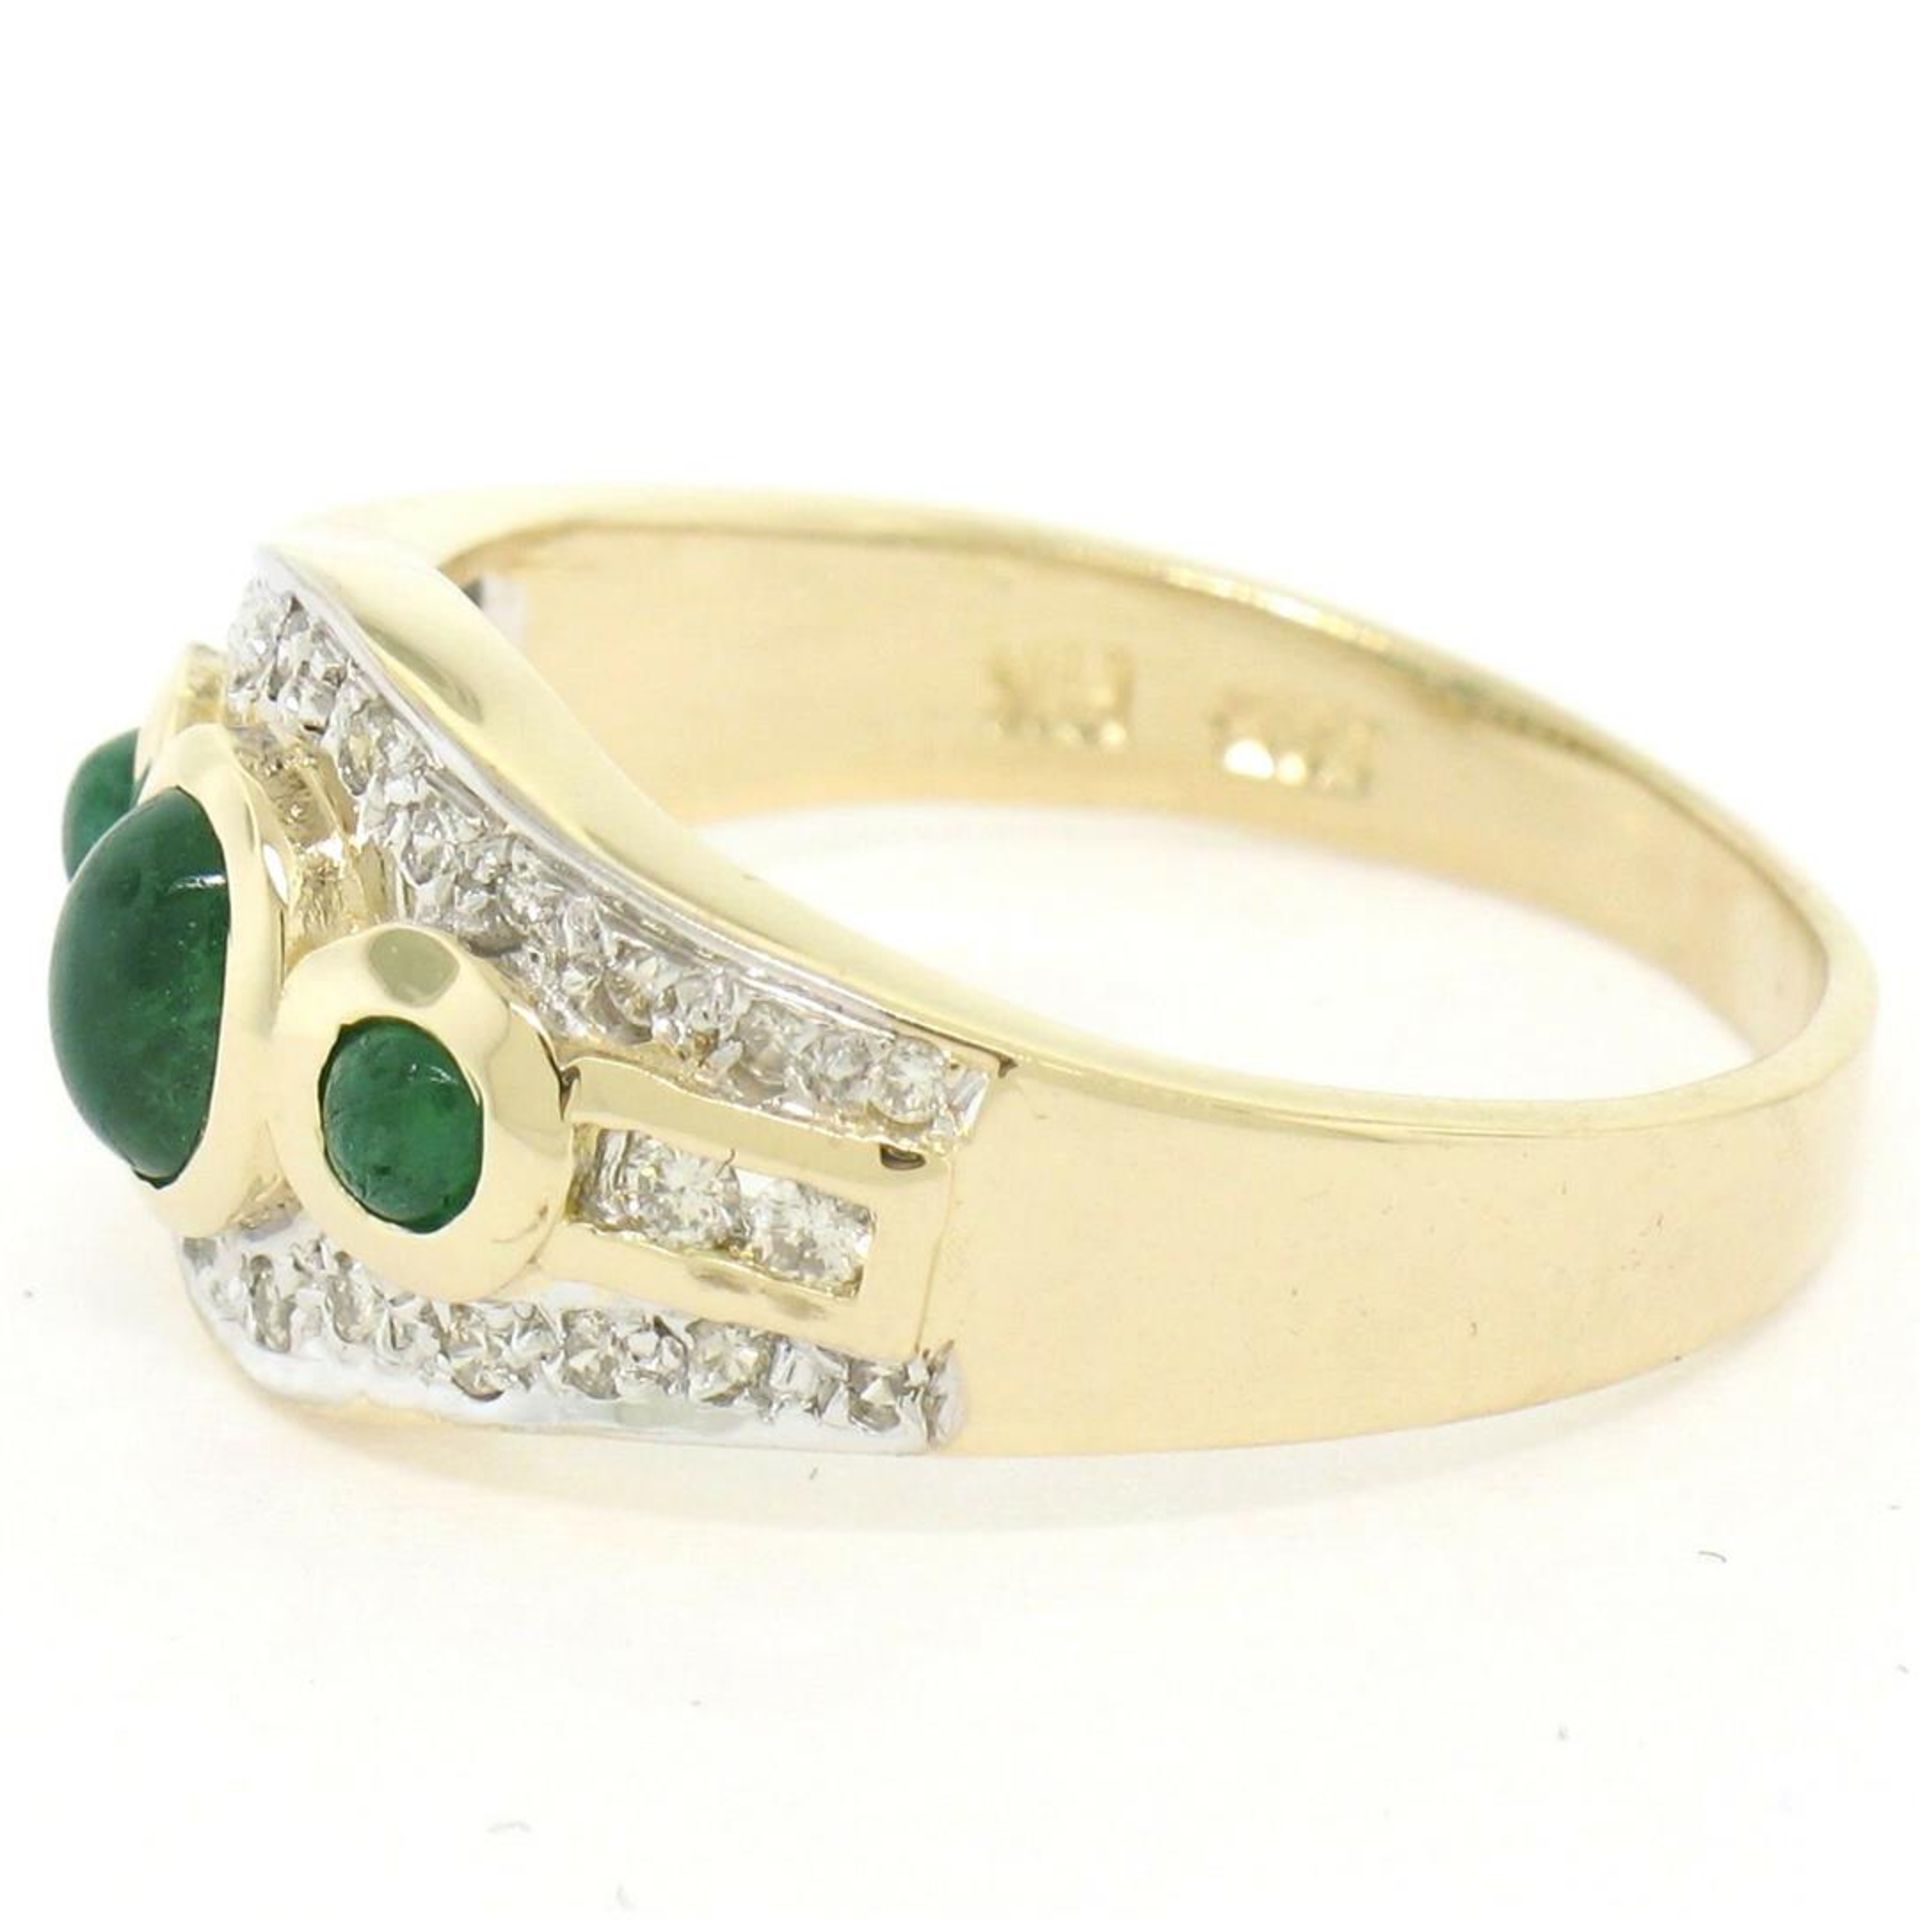 Petite 14K TT Gold 0.68 ctw 3 Cabochon Emerald & Diamond Accented Cocktail Ring - Image 2 of 9